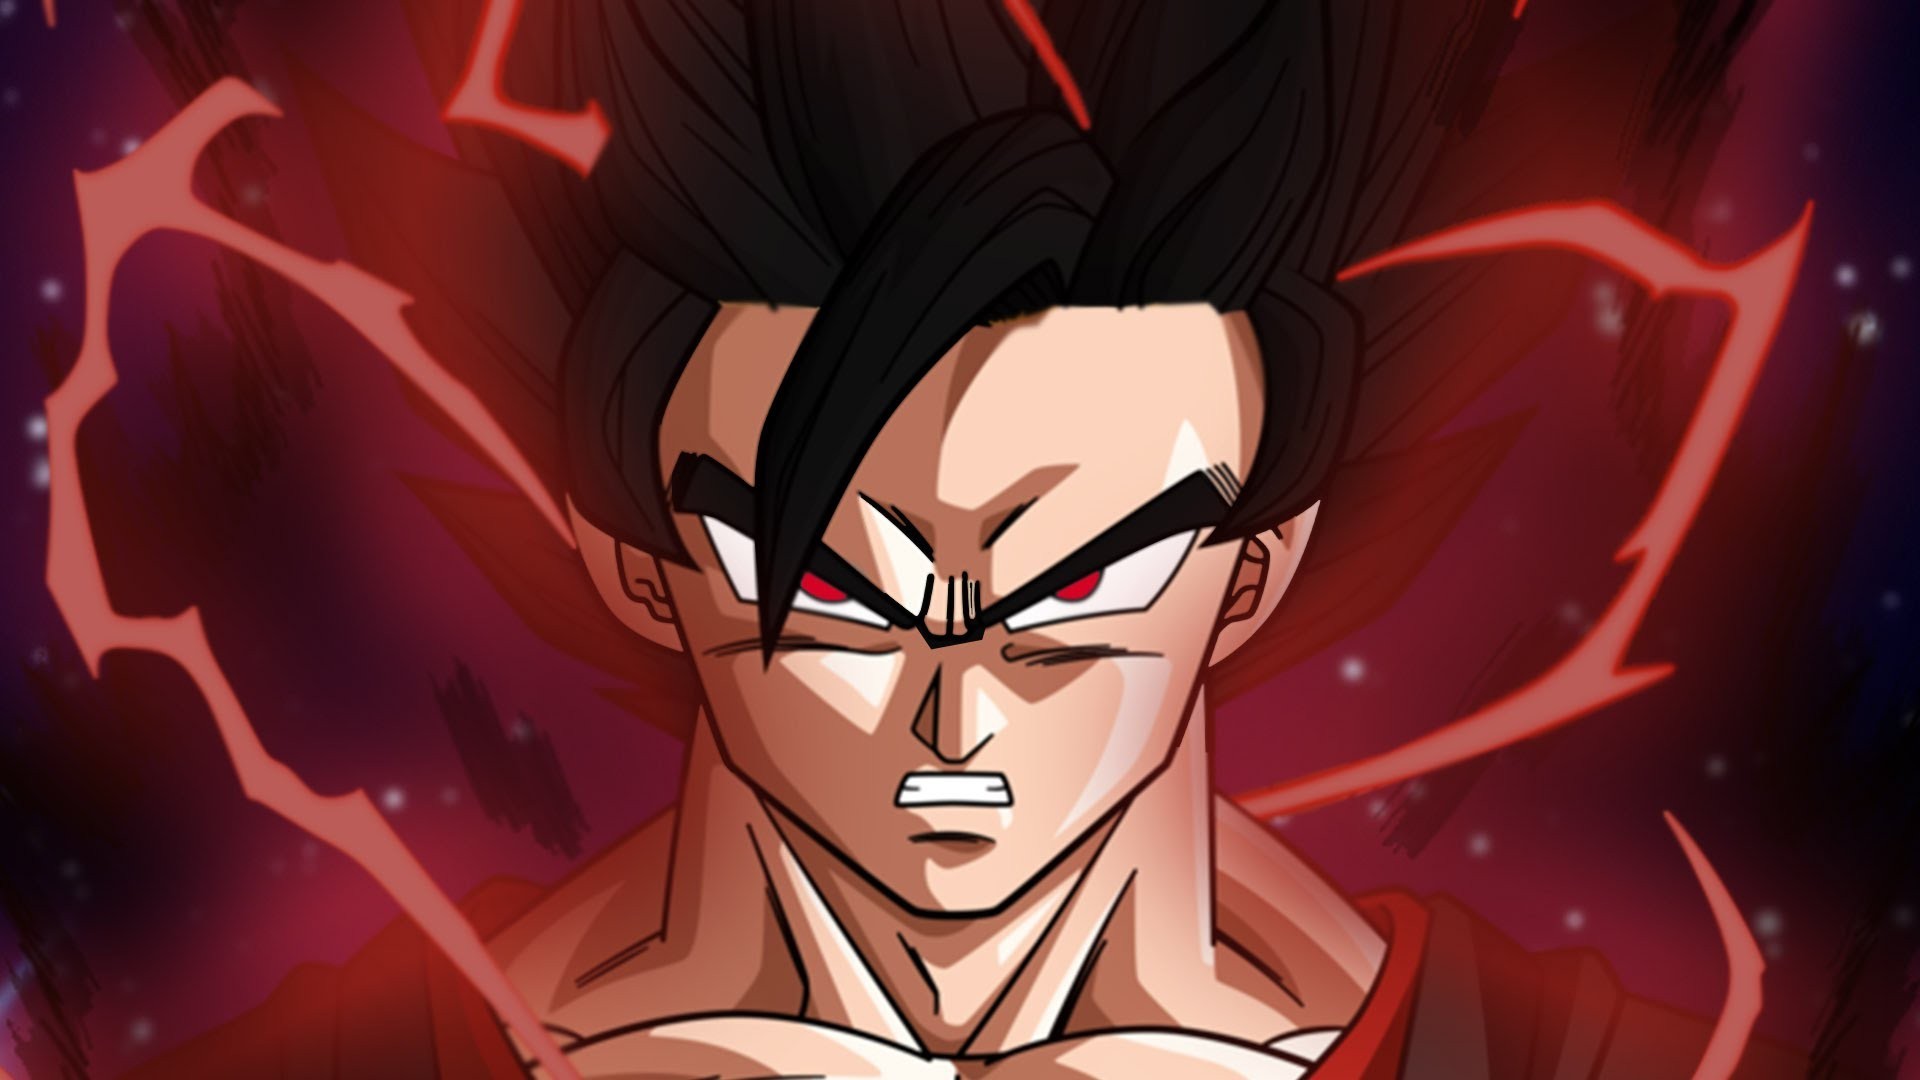 Black Goku HD Wallpaper with image resolution 1920x1080 pixel. You can make this wallpaper for your Desktop Computer Backgrounds, Mac Wallpapers, Android Lock screen or iPhone Screensavers